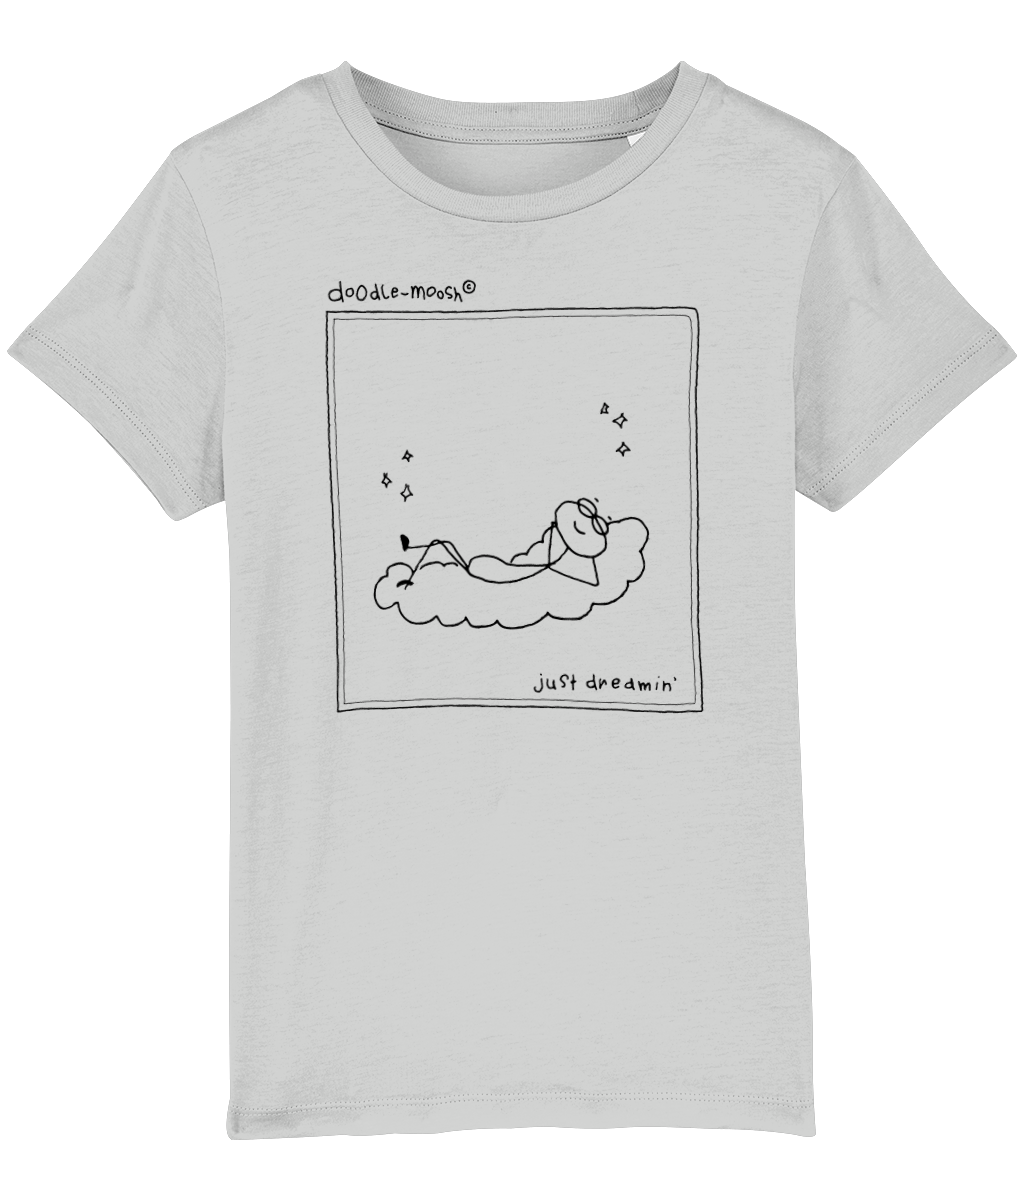 Just dreaming t-shirt, grey with black